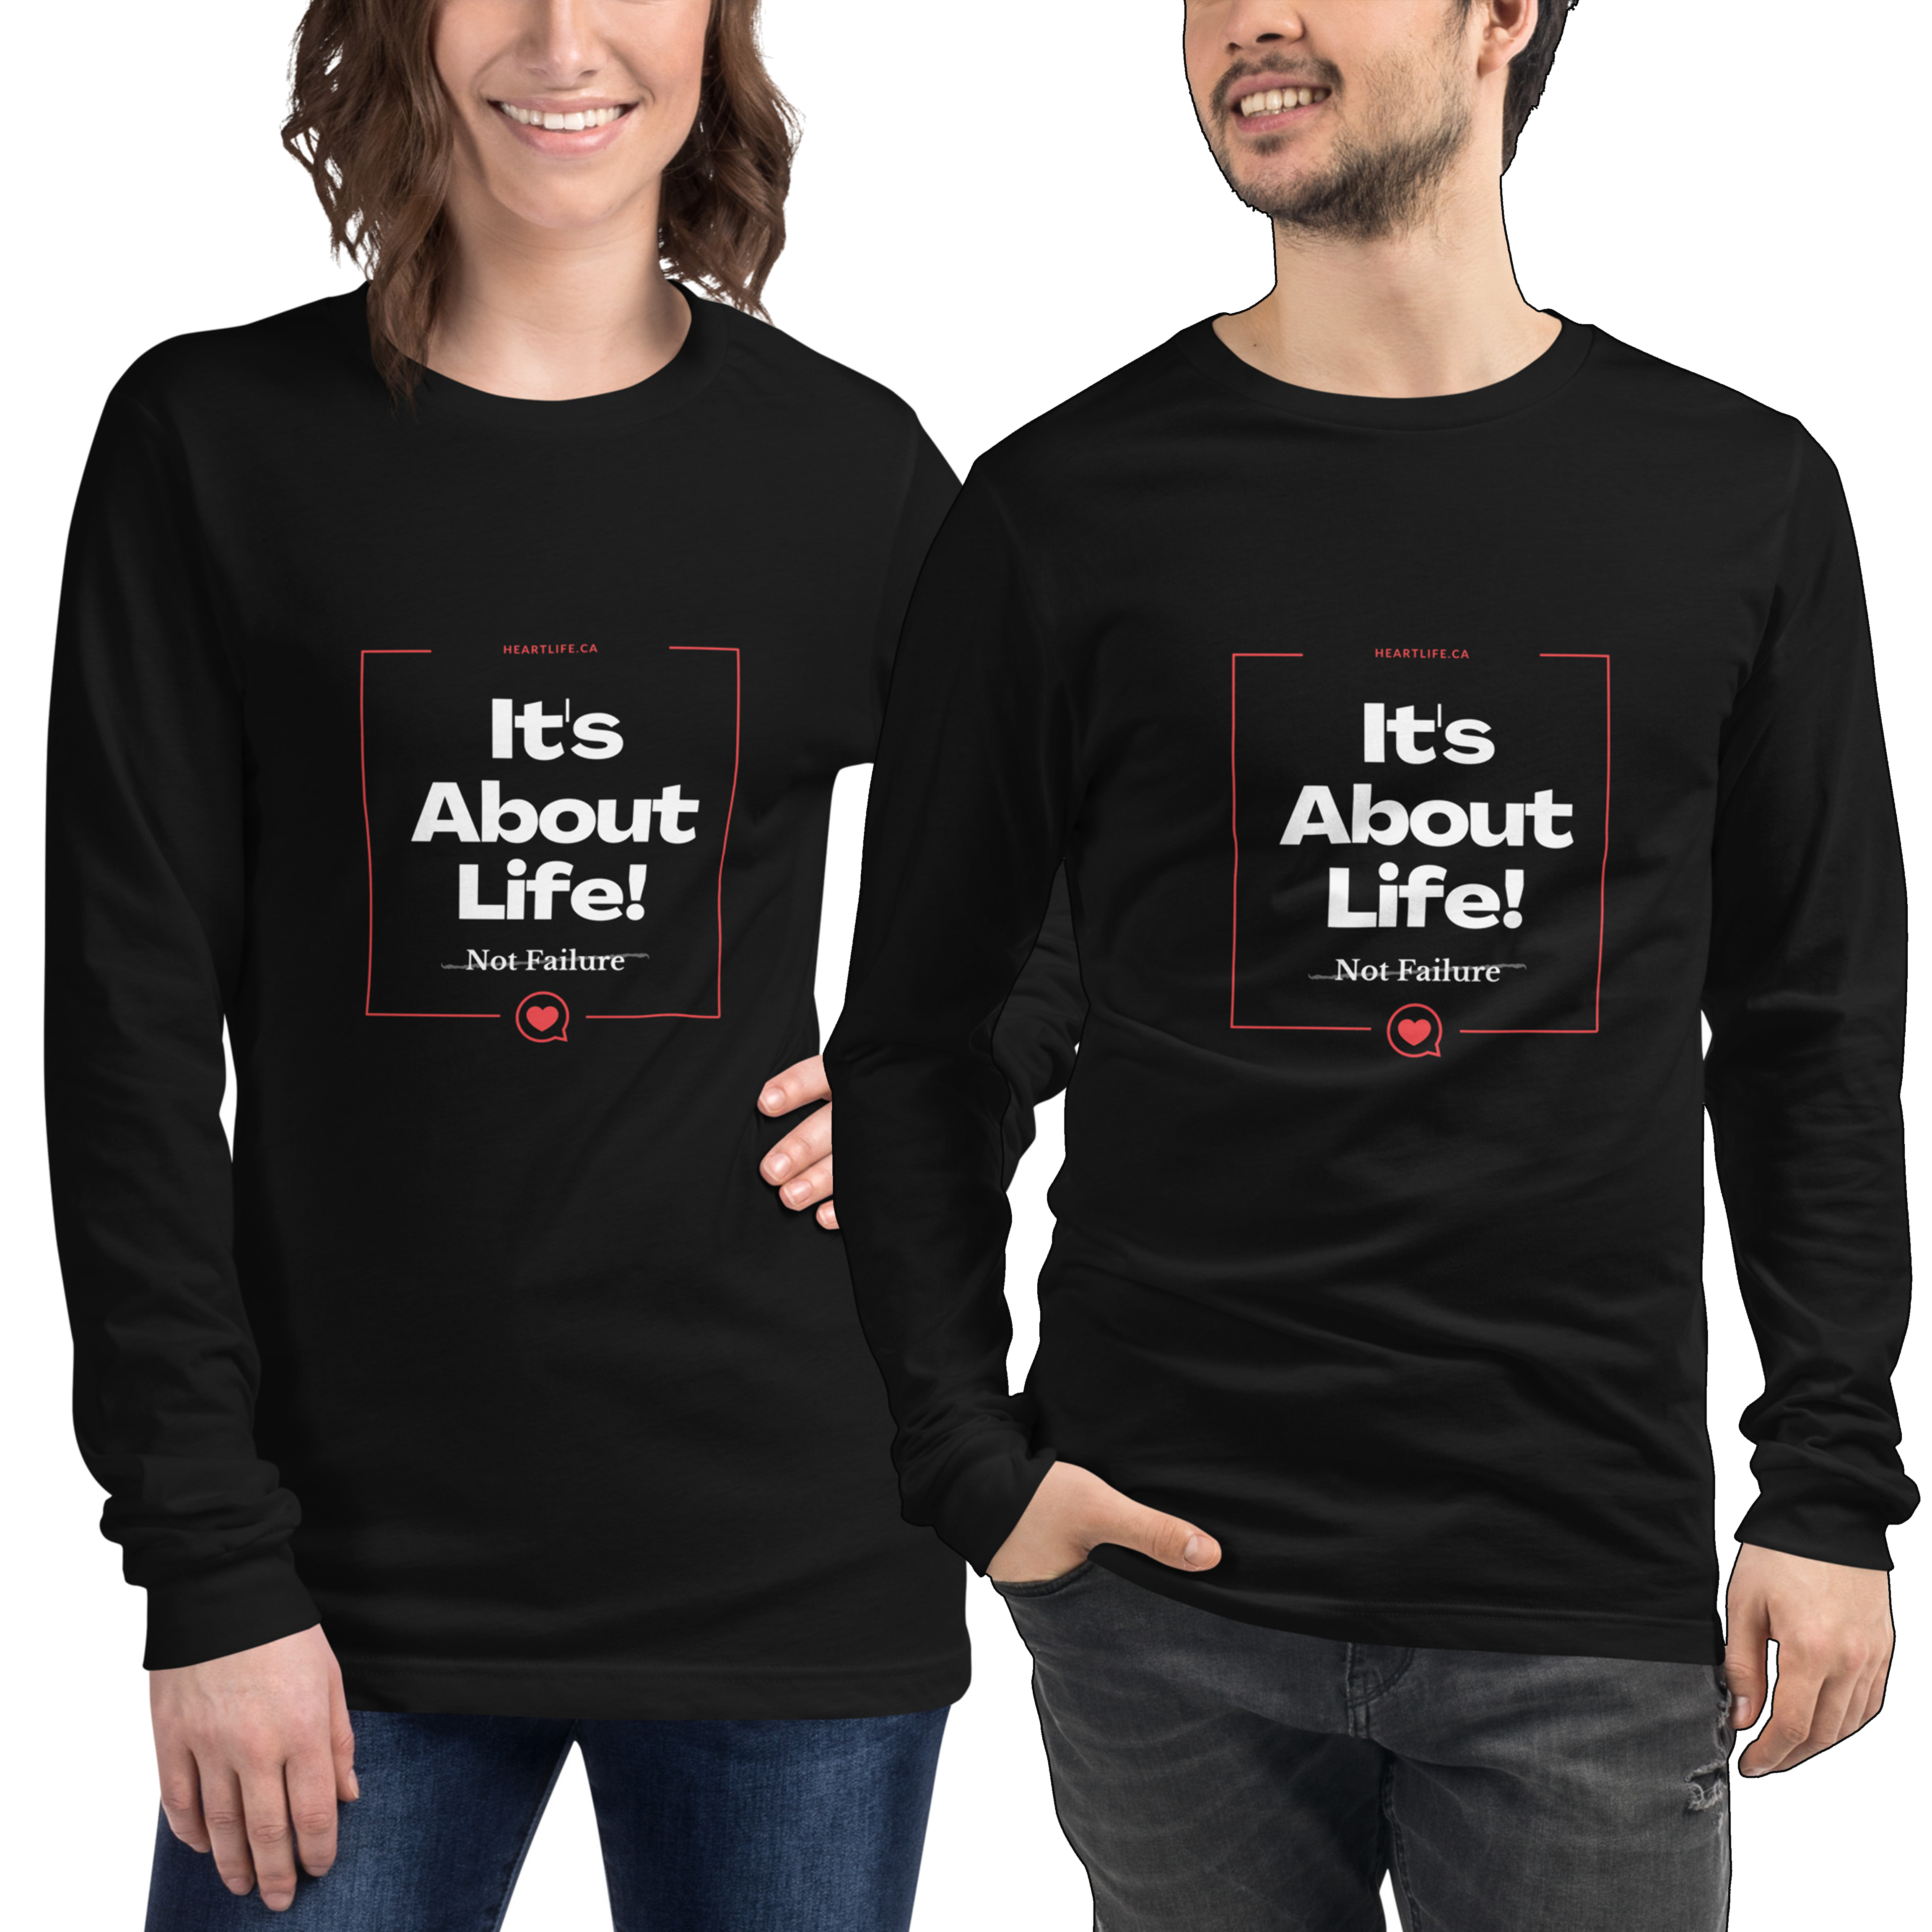 "It's About LIfe!" Unisex Long Sleeve Tee